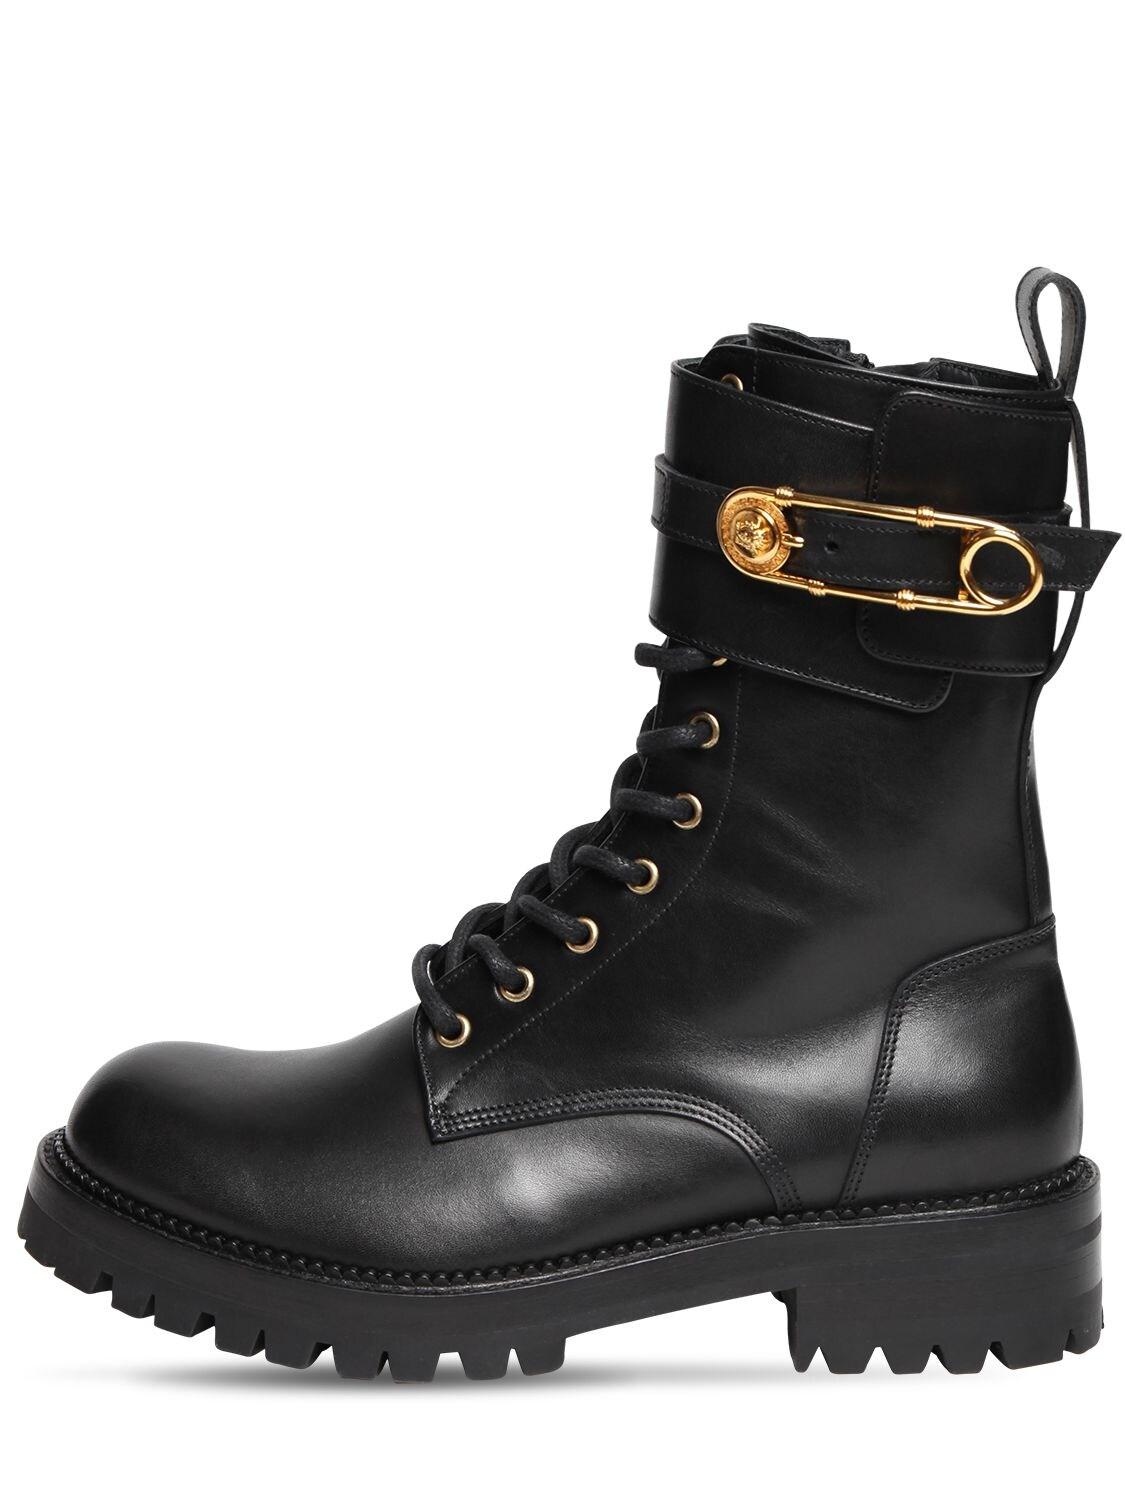 Versace Army Boots - Army Military